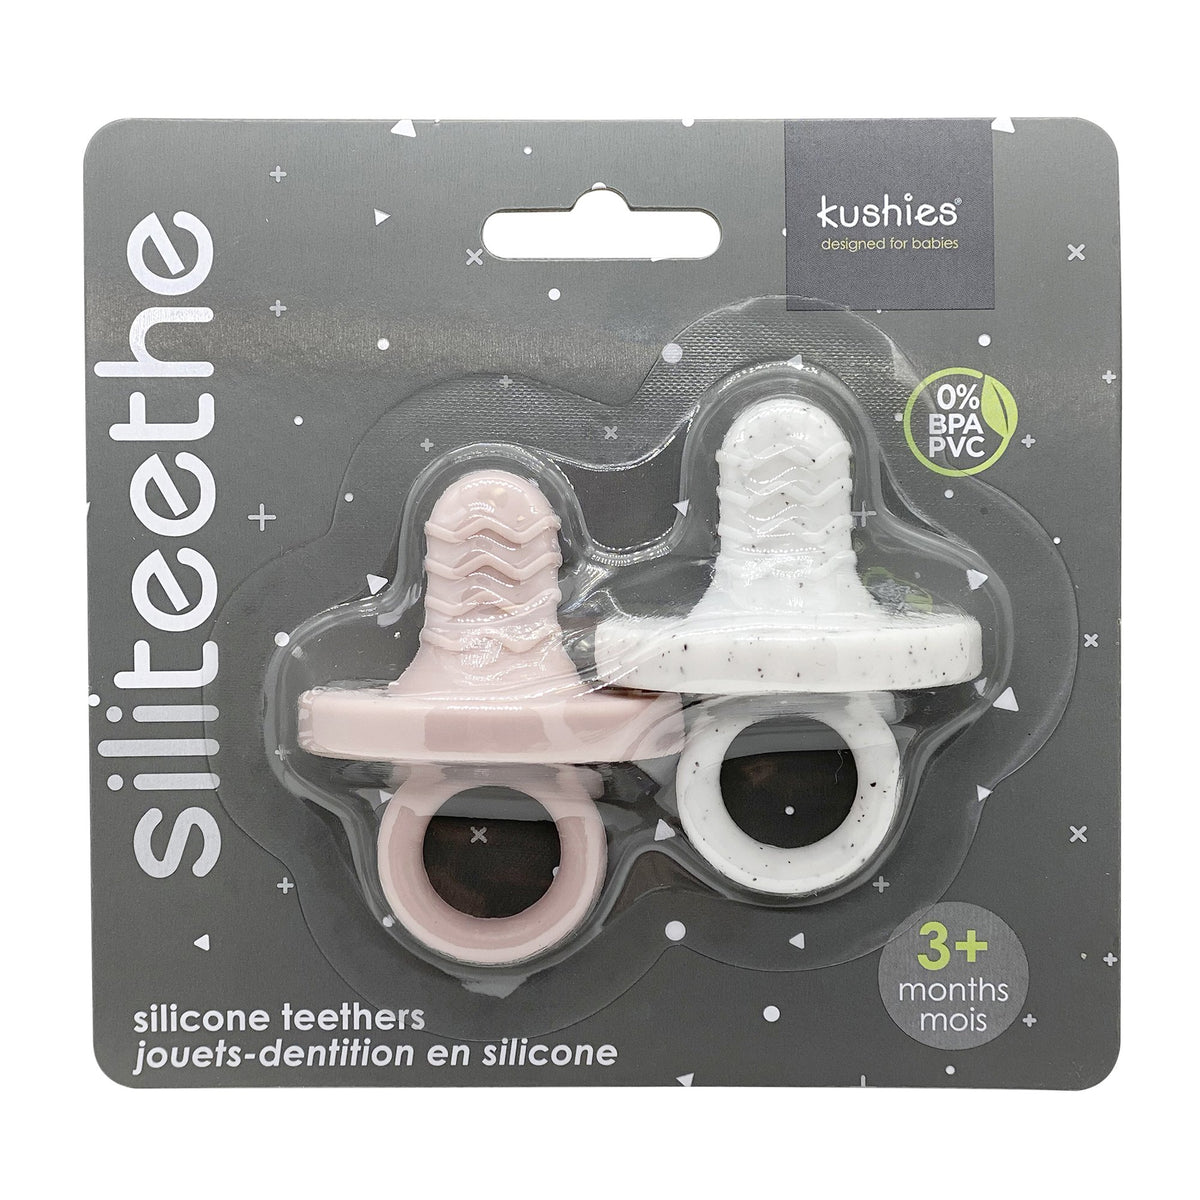 rose and grey silicone teethers 2 pack packaging